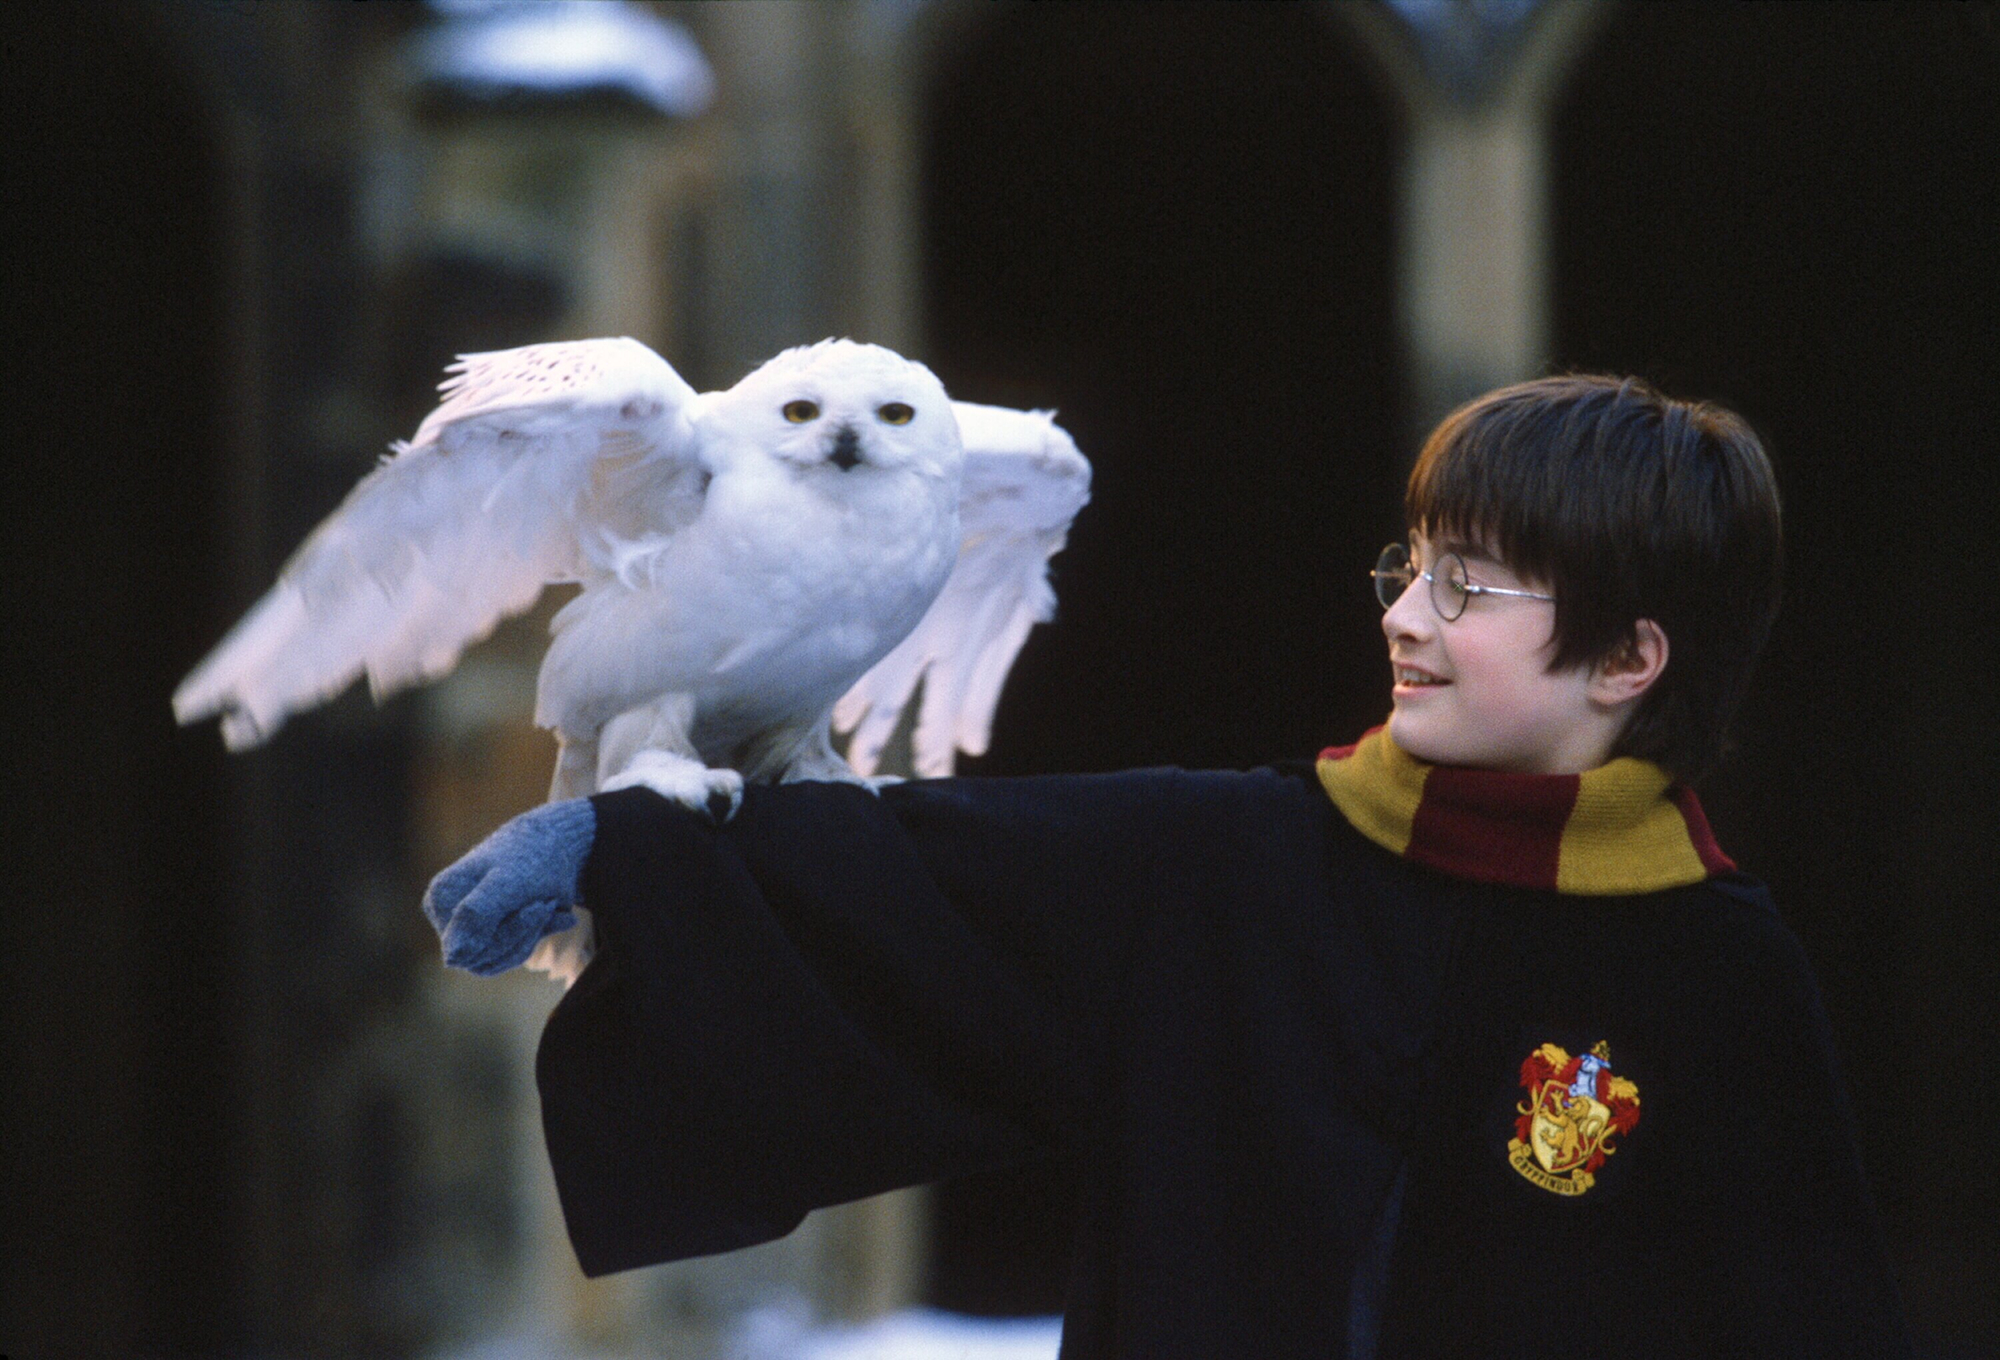 harry potter and the philosopher's stone, daniel radcliffe, harry potter, movie, snowy owl 4K, Ultra HD